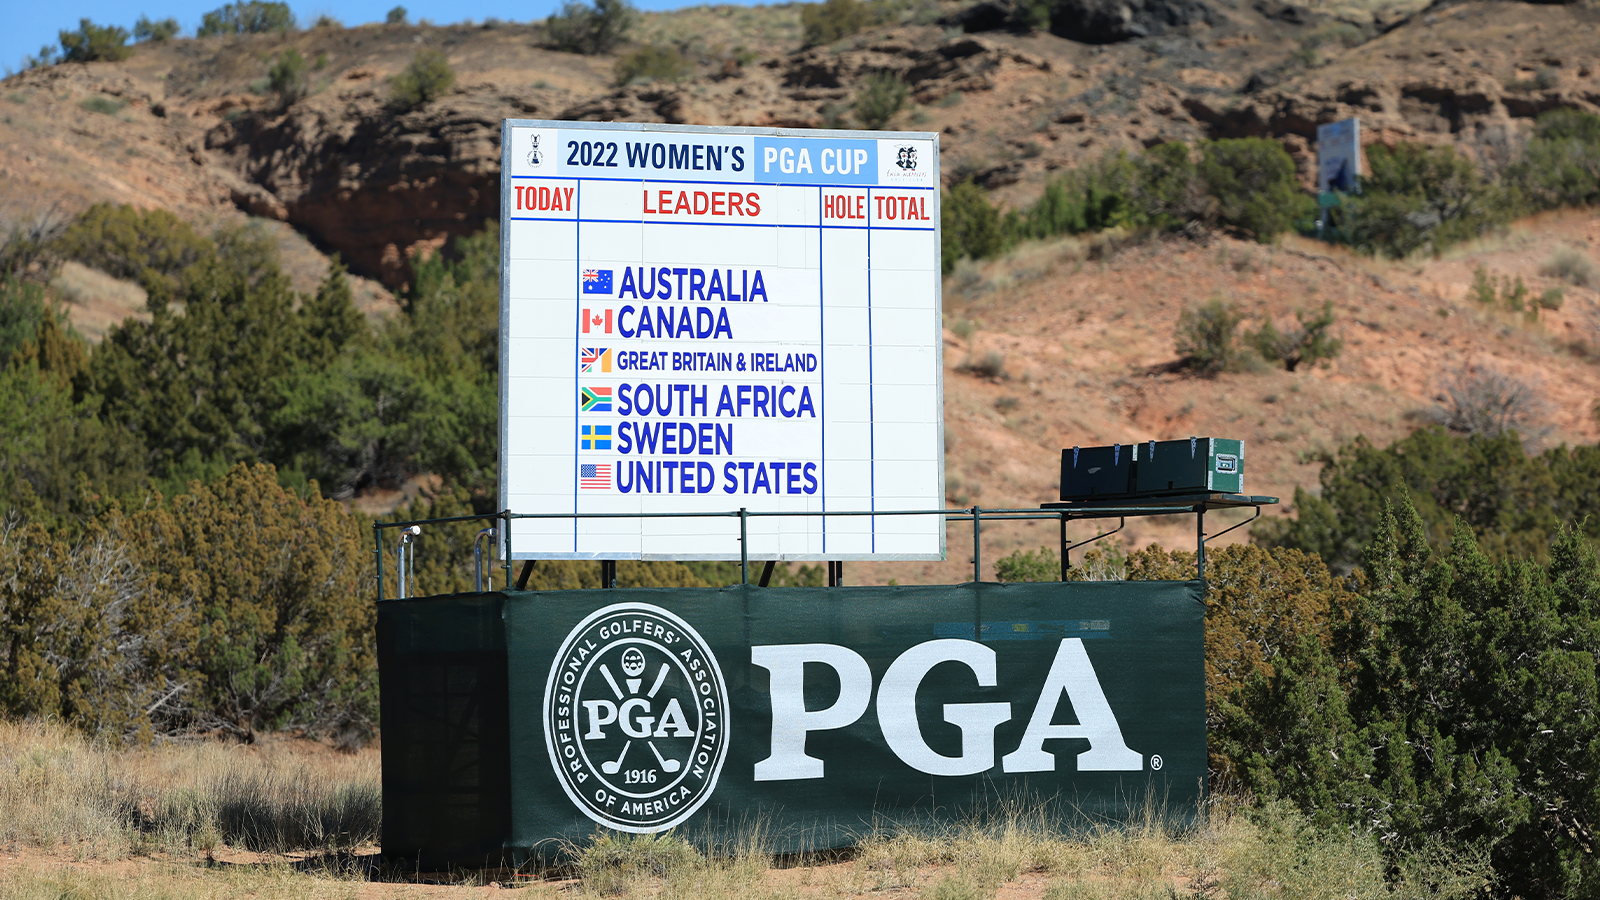 An overall view of a scoreboard during a practice round for the 2nd PGA Women's Cup at Twin Warriors Golf Club on Tuesday, October 25, 2022 in Santa Ana Pueblo, New Mexico. (Photo by Sam Greenwood/PGA of America)